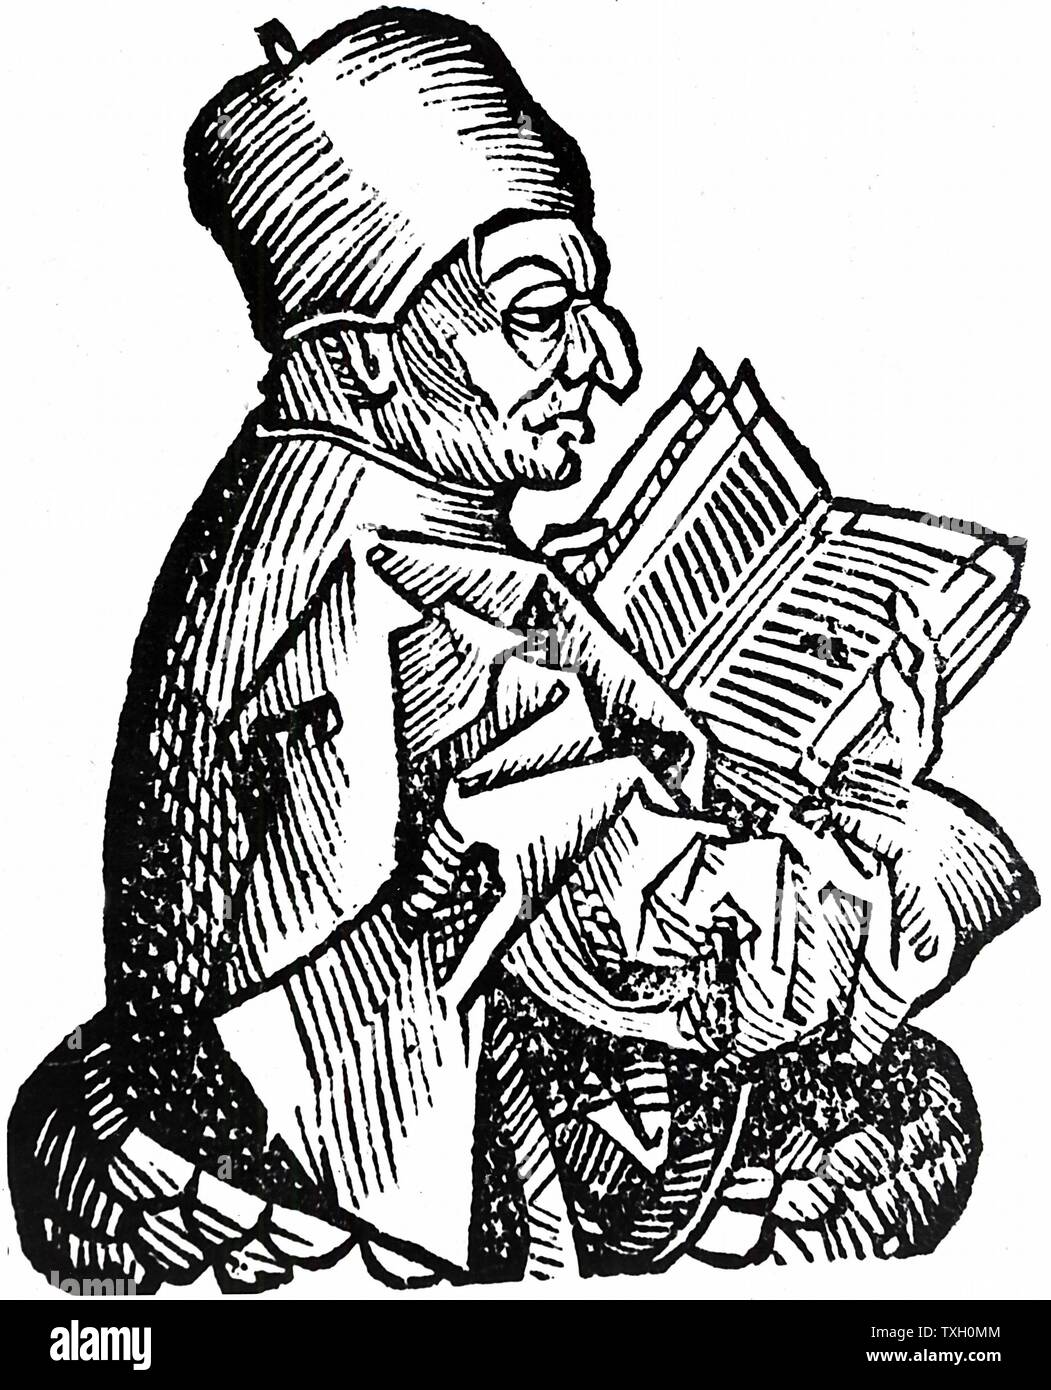 Venerable Bede (c.673-735) Anglo-Saxon theologian, scholar and historian; monk at Jarrow, Northumberland, holding open a book. Woodcut from Hartmann Schedel 'Liber chronicarum mundi' (Nuremberg Chronicle) Nuremberg, 1493 Stock Photo